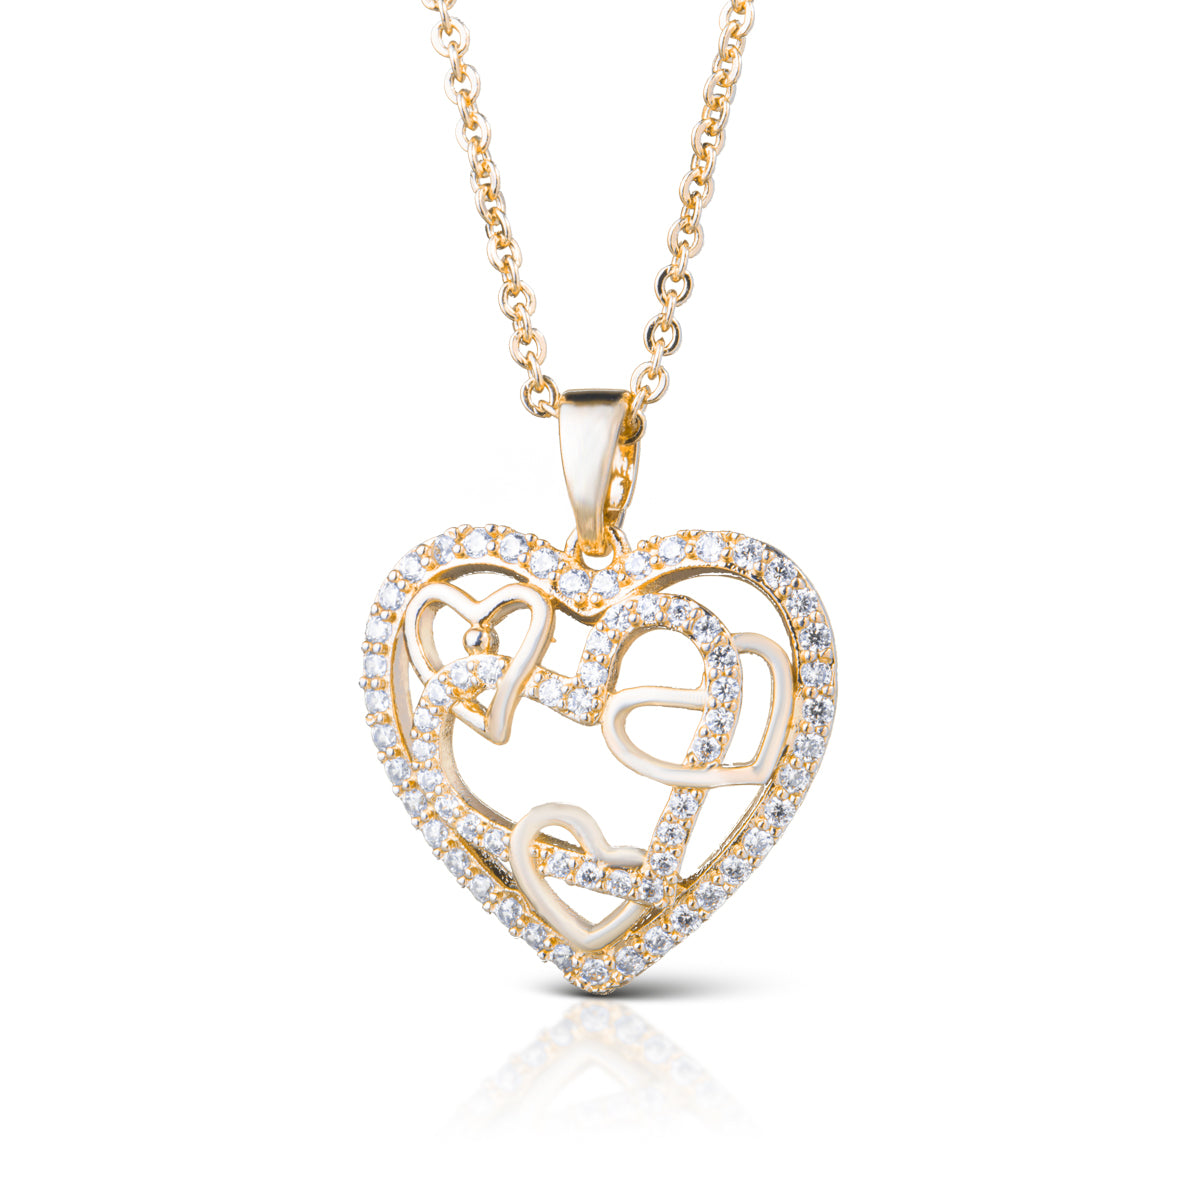 Inset Hearts Necklace - Gold